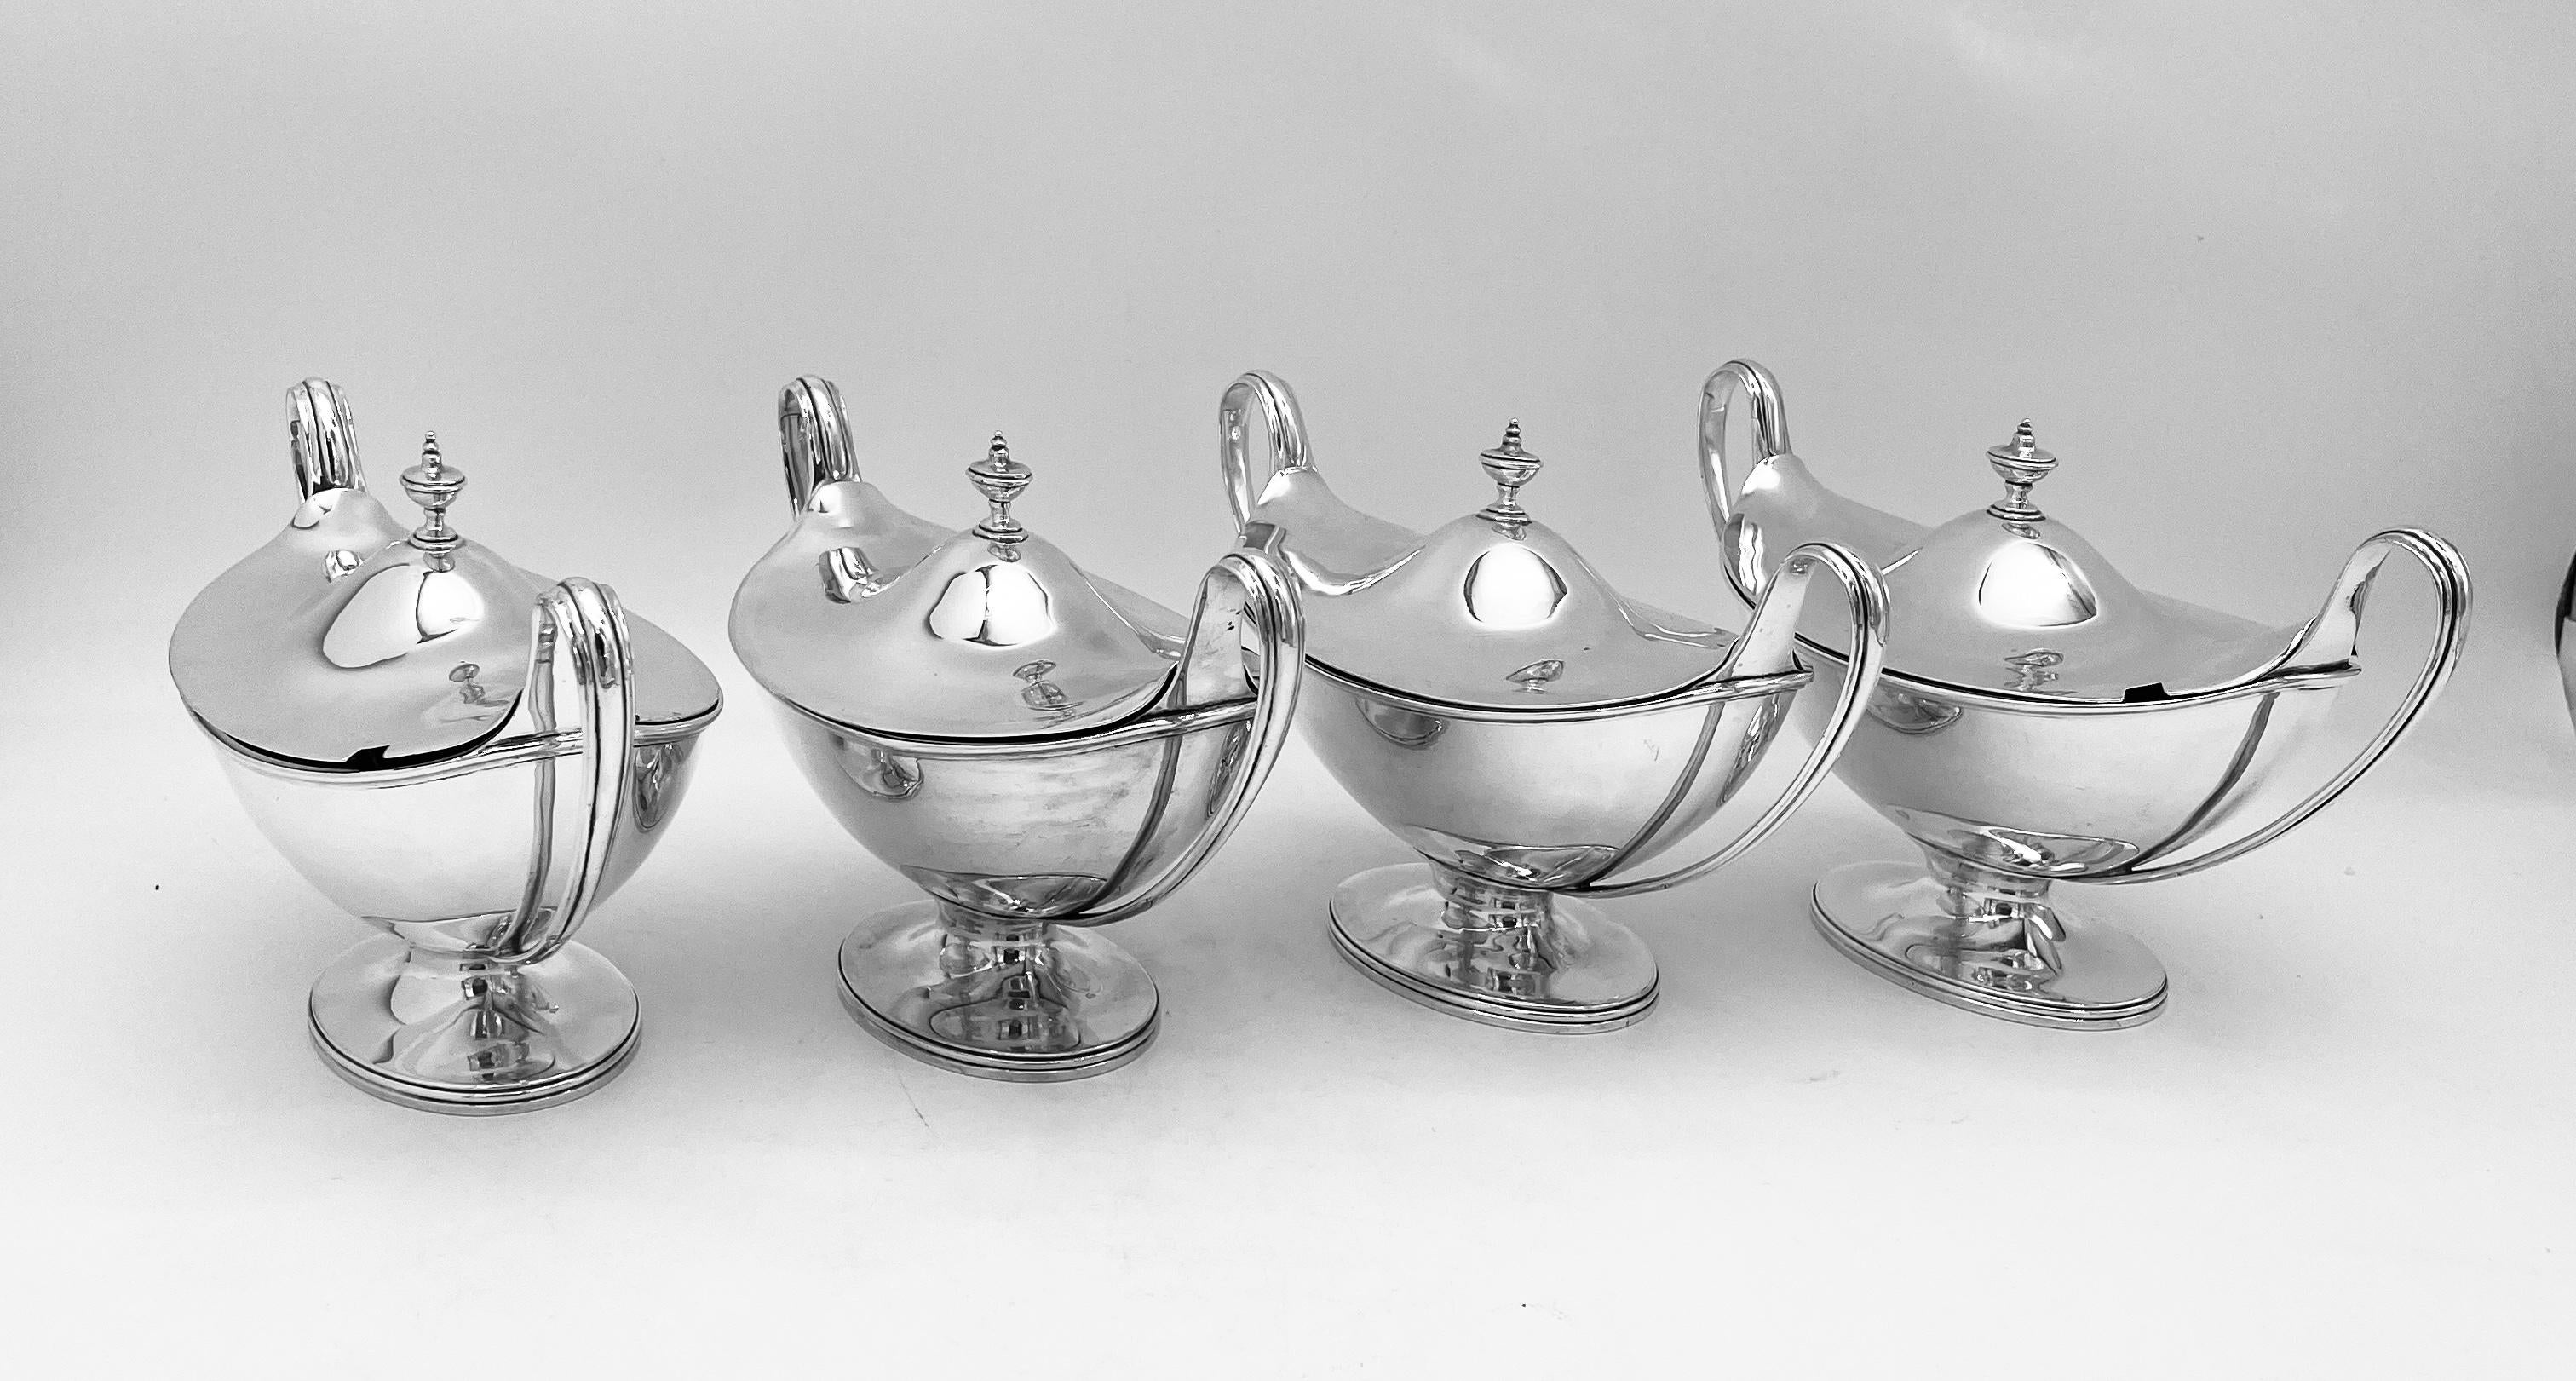 A charming and beautifully made set of 4 Antique Sterling Silver Sauce Tureens, made by the silversmith John Robins, and hallmarked in London 1789.
Each tureen has a detachable lid, and all eight separate pieces, 4 tureens and 4 covers, are original